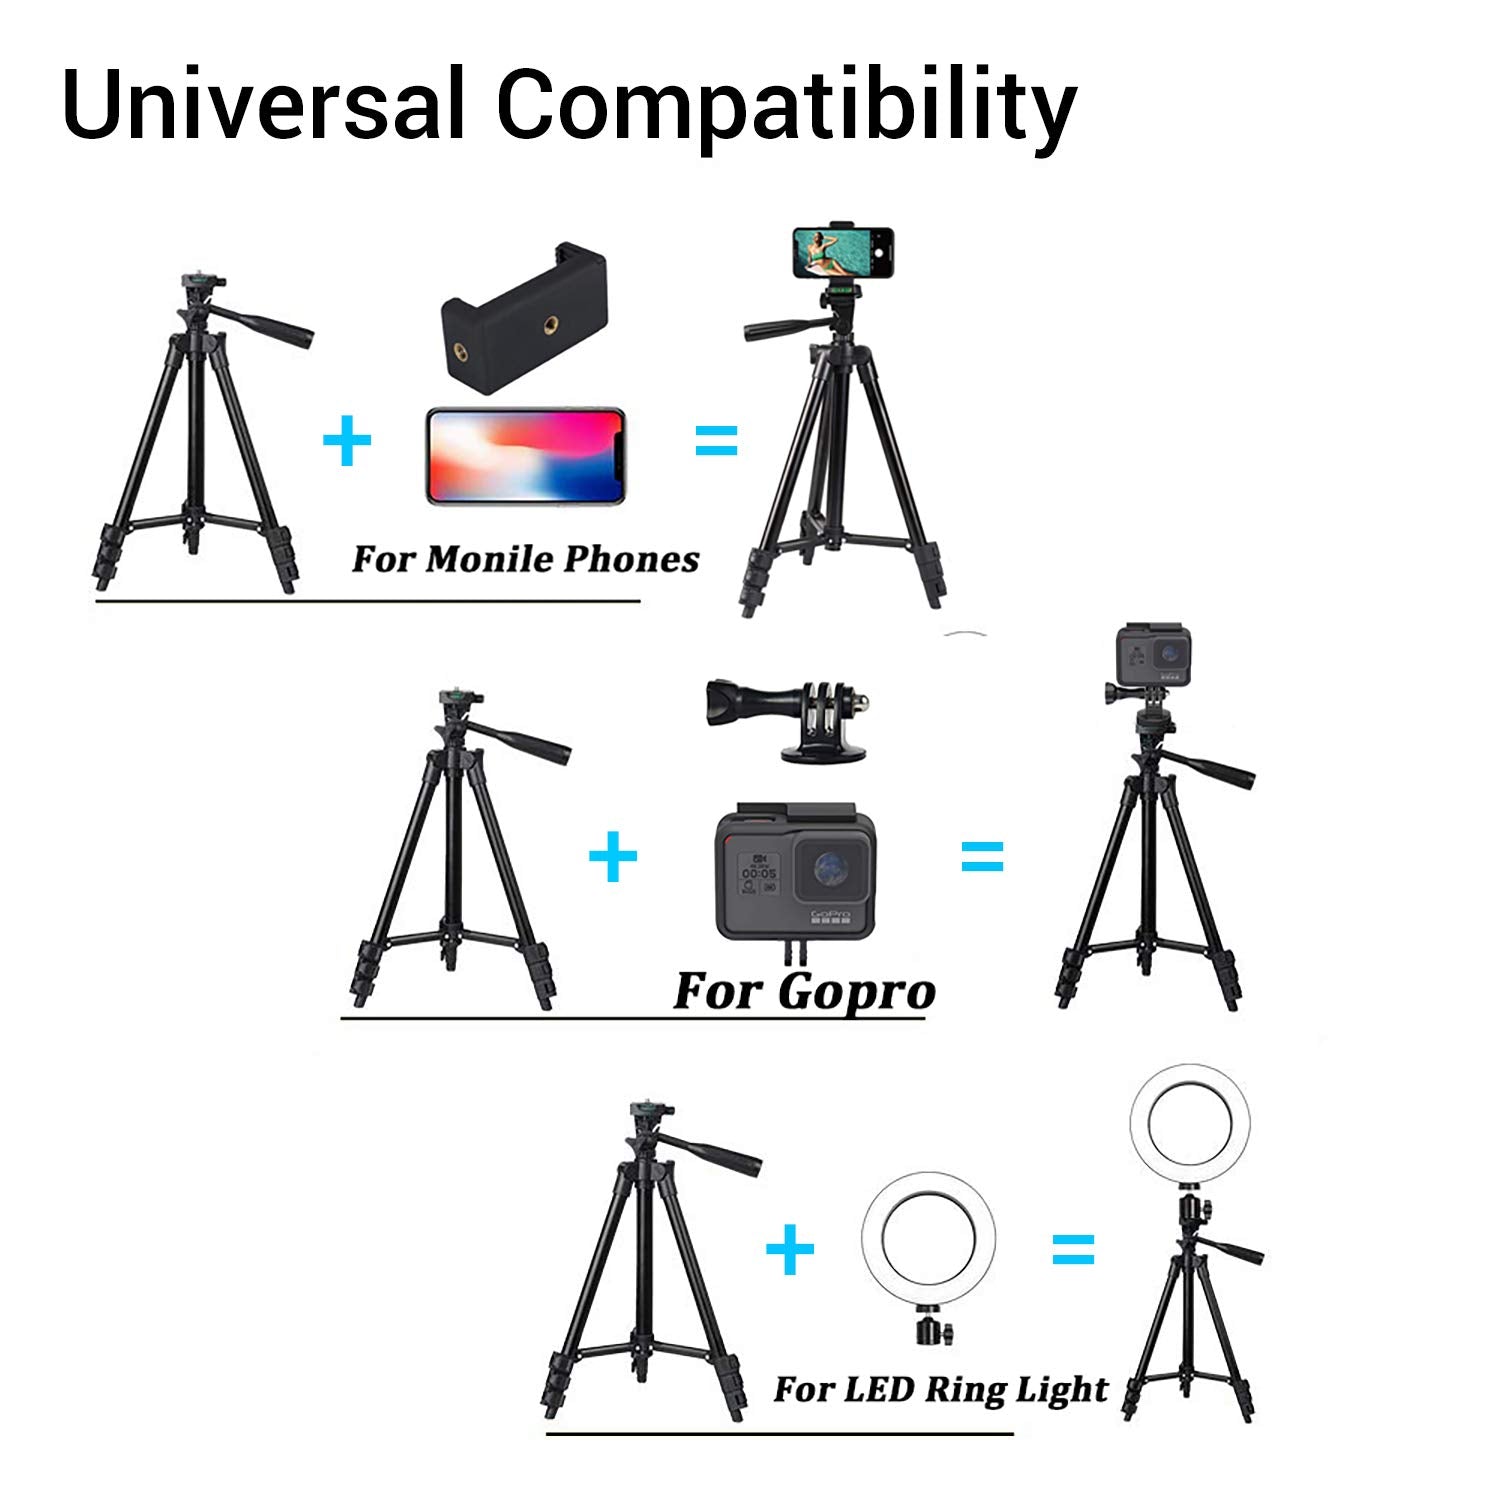 Phone Tripod,LINKCOOL 42" Aluminum Lightweight Portable Camera Tripod for iPhone/Samsung/Smartphone/Action Camera/DSLR Camera with Phone Holder & Wireless Bluetooth Control Remote